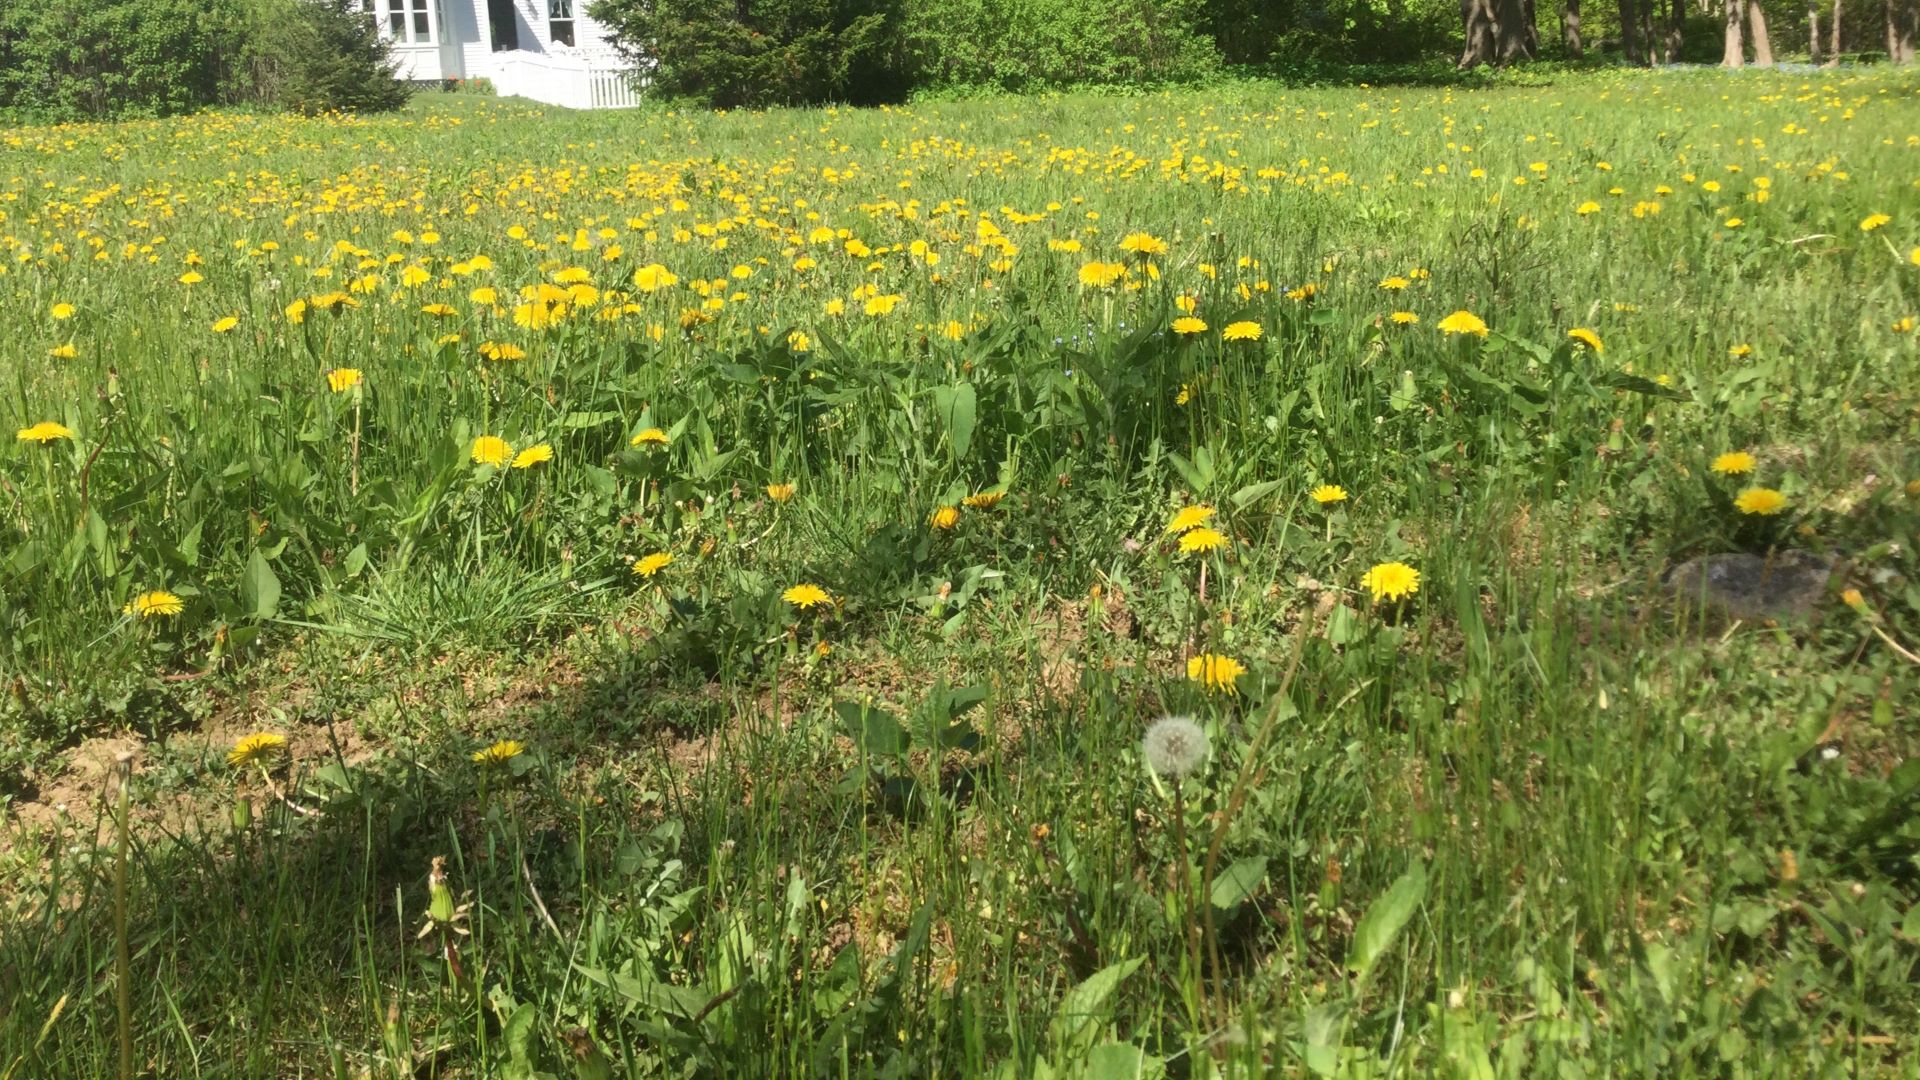 No Mow May strives to help bees, butterflies